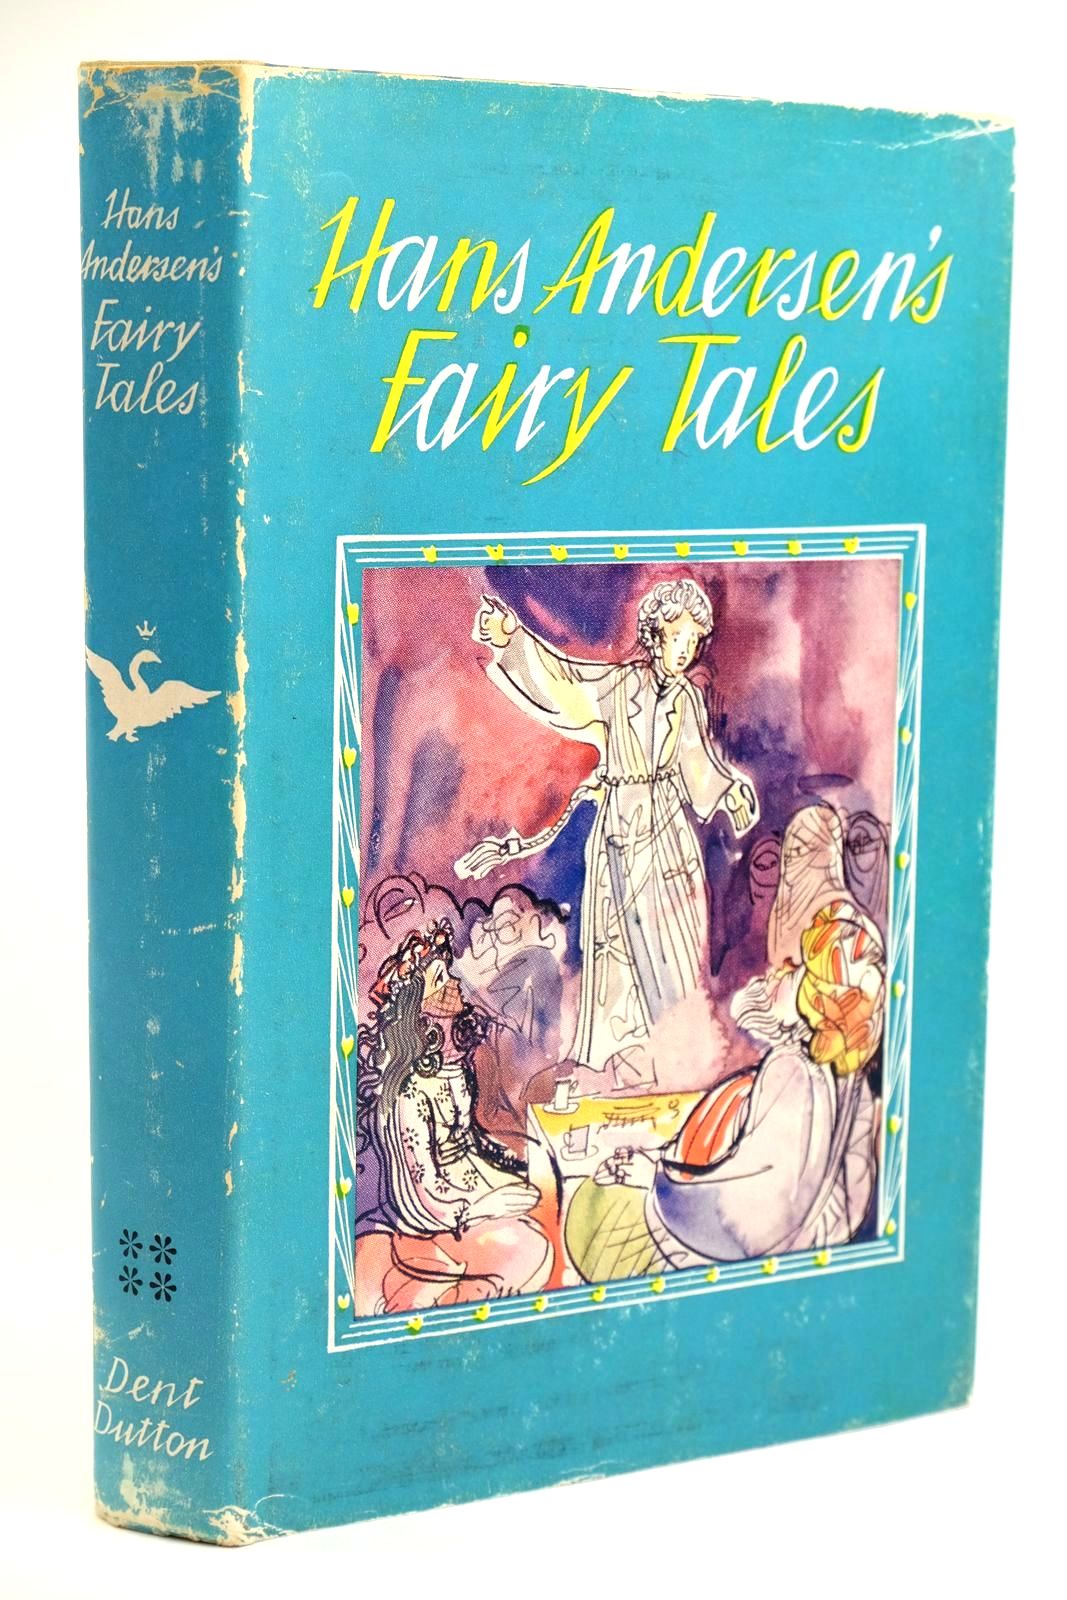 Photo of HANS ANDERSEN'S FAIRY TALES written by Andersen, Hans Christian Spink, Reginald illustrated by Baumhauer, H. published by J.M. Dent &amp; Sons Ltd. (STOCK CODE: 1319182)  for sale by Stella & Rose's Books